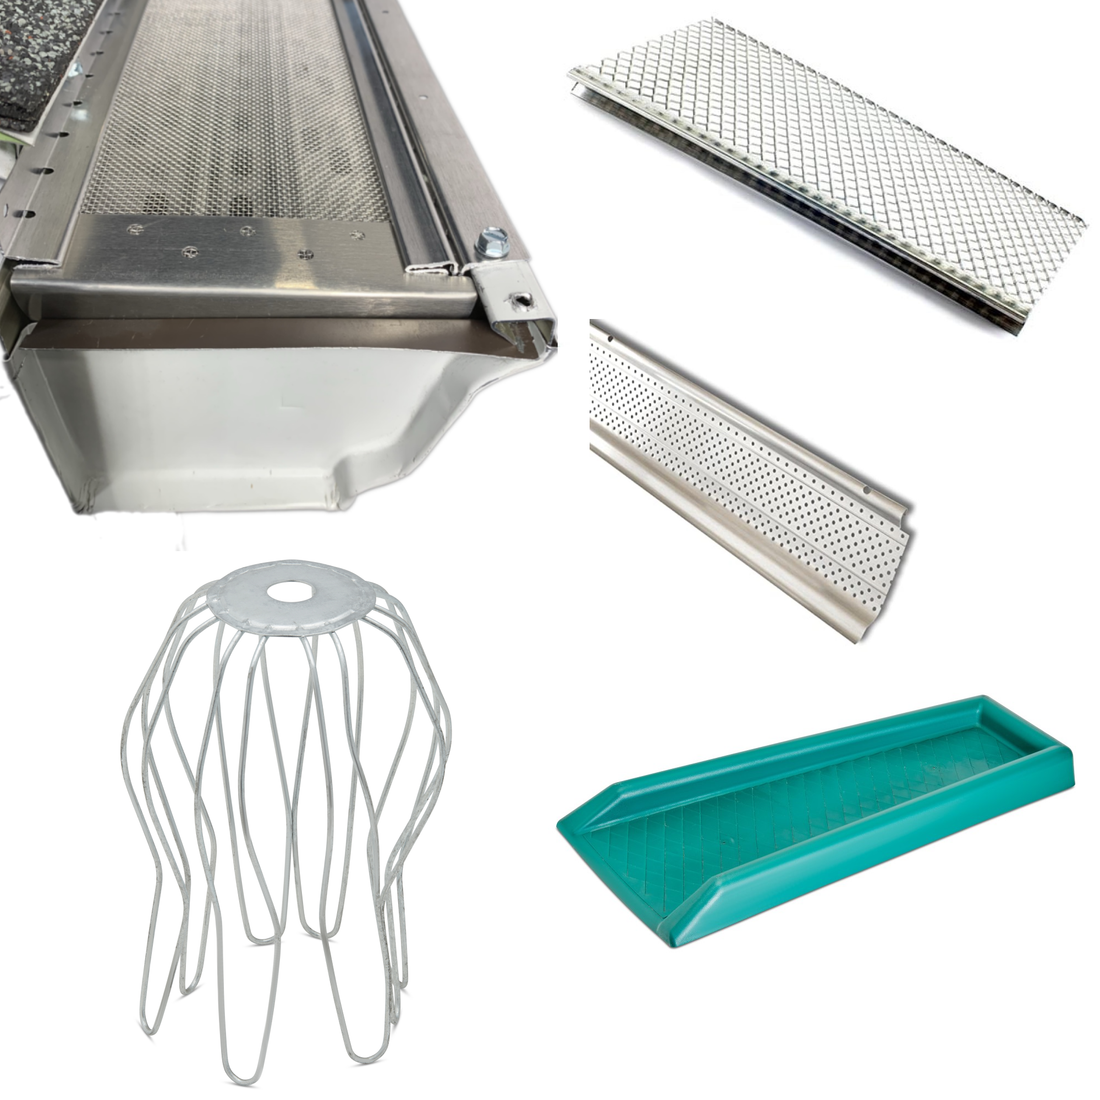 Gutter Guards on Sale Now